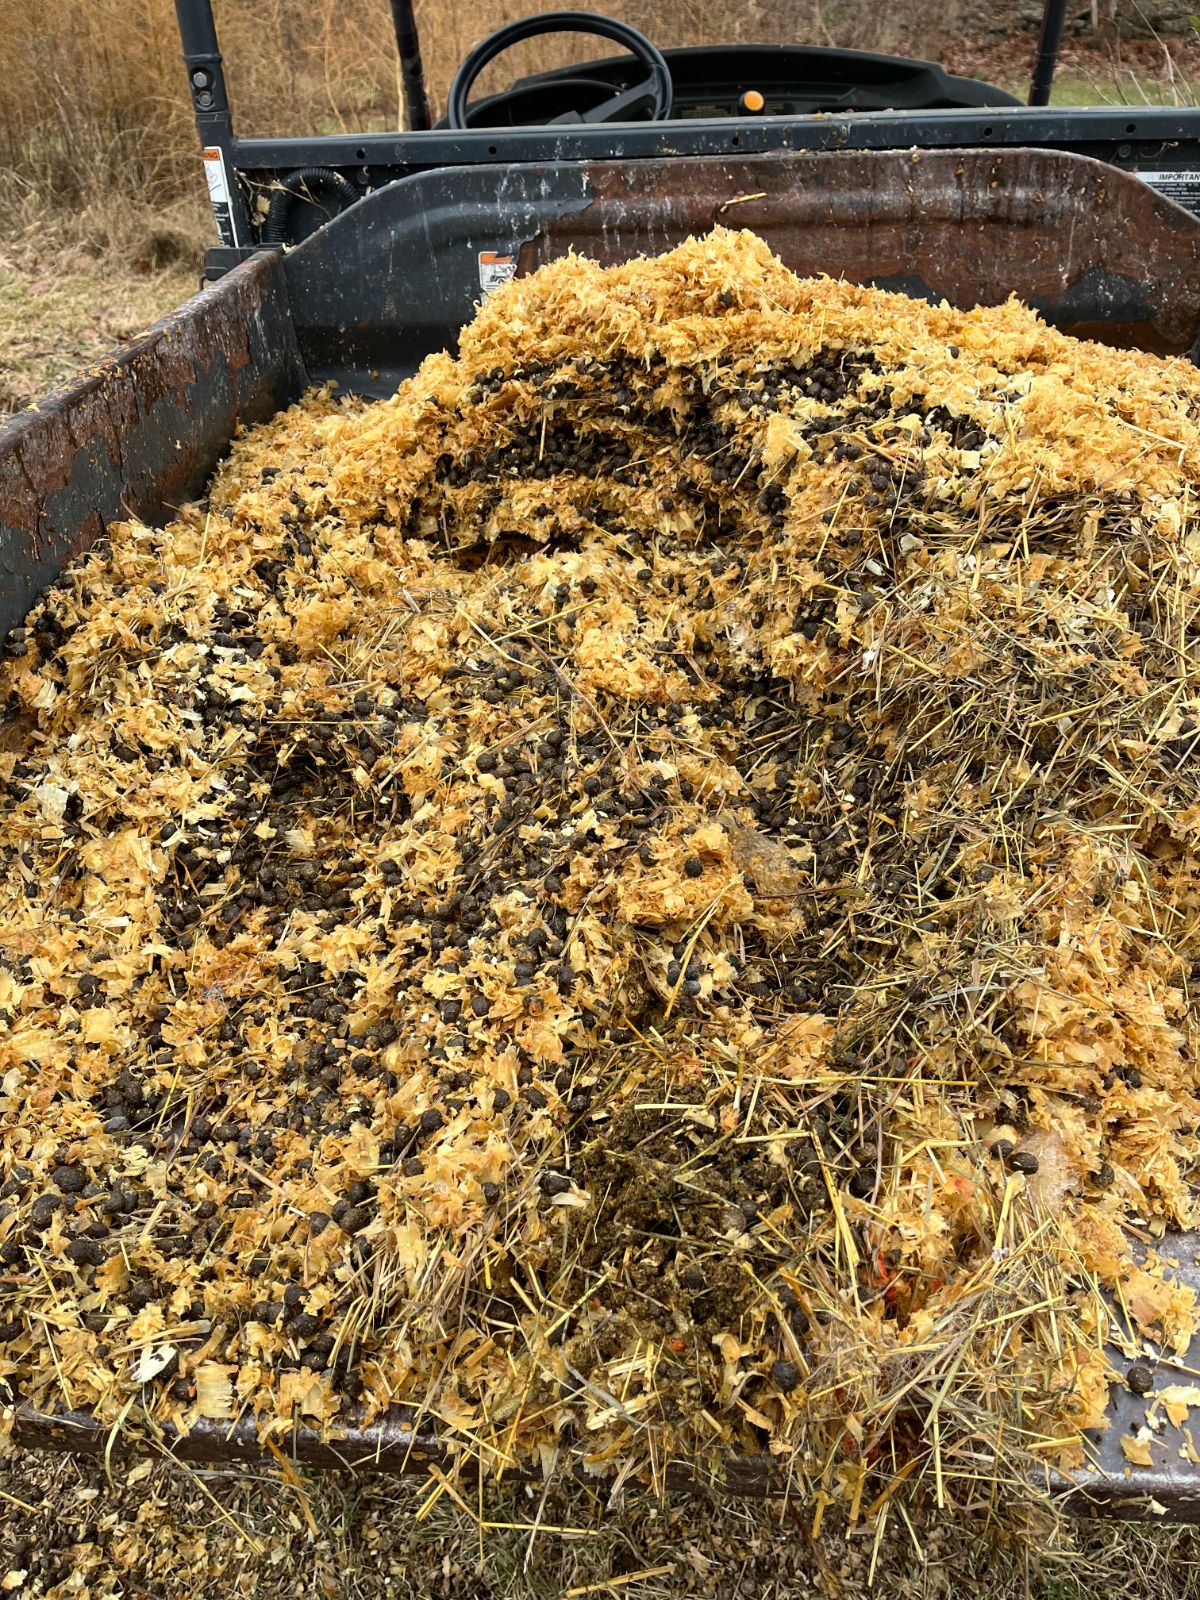 Shavings and manure waste from cleaning meat rabbit cages